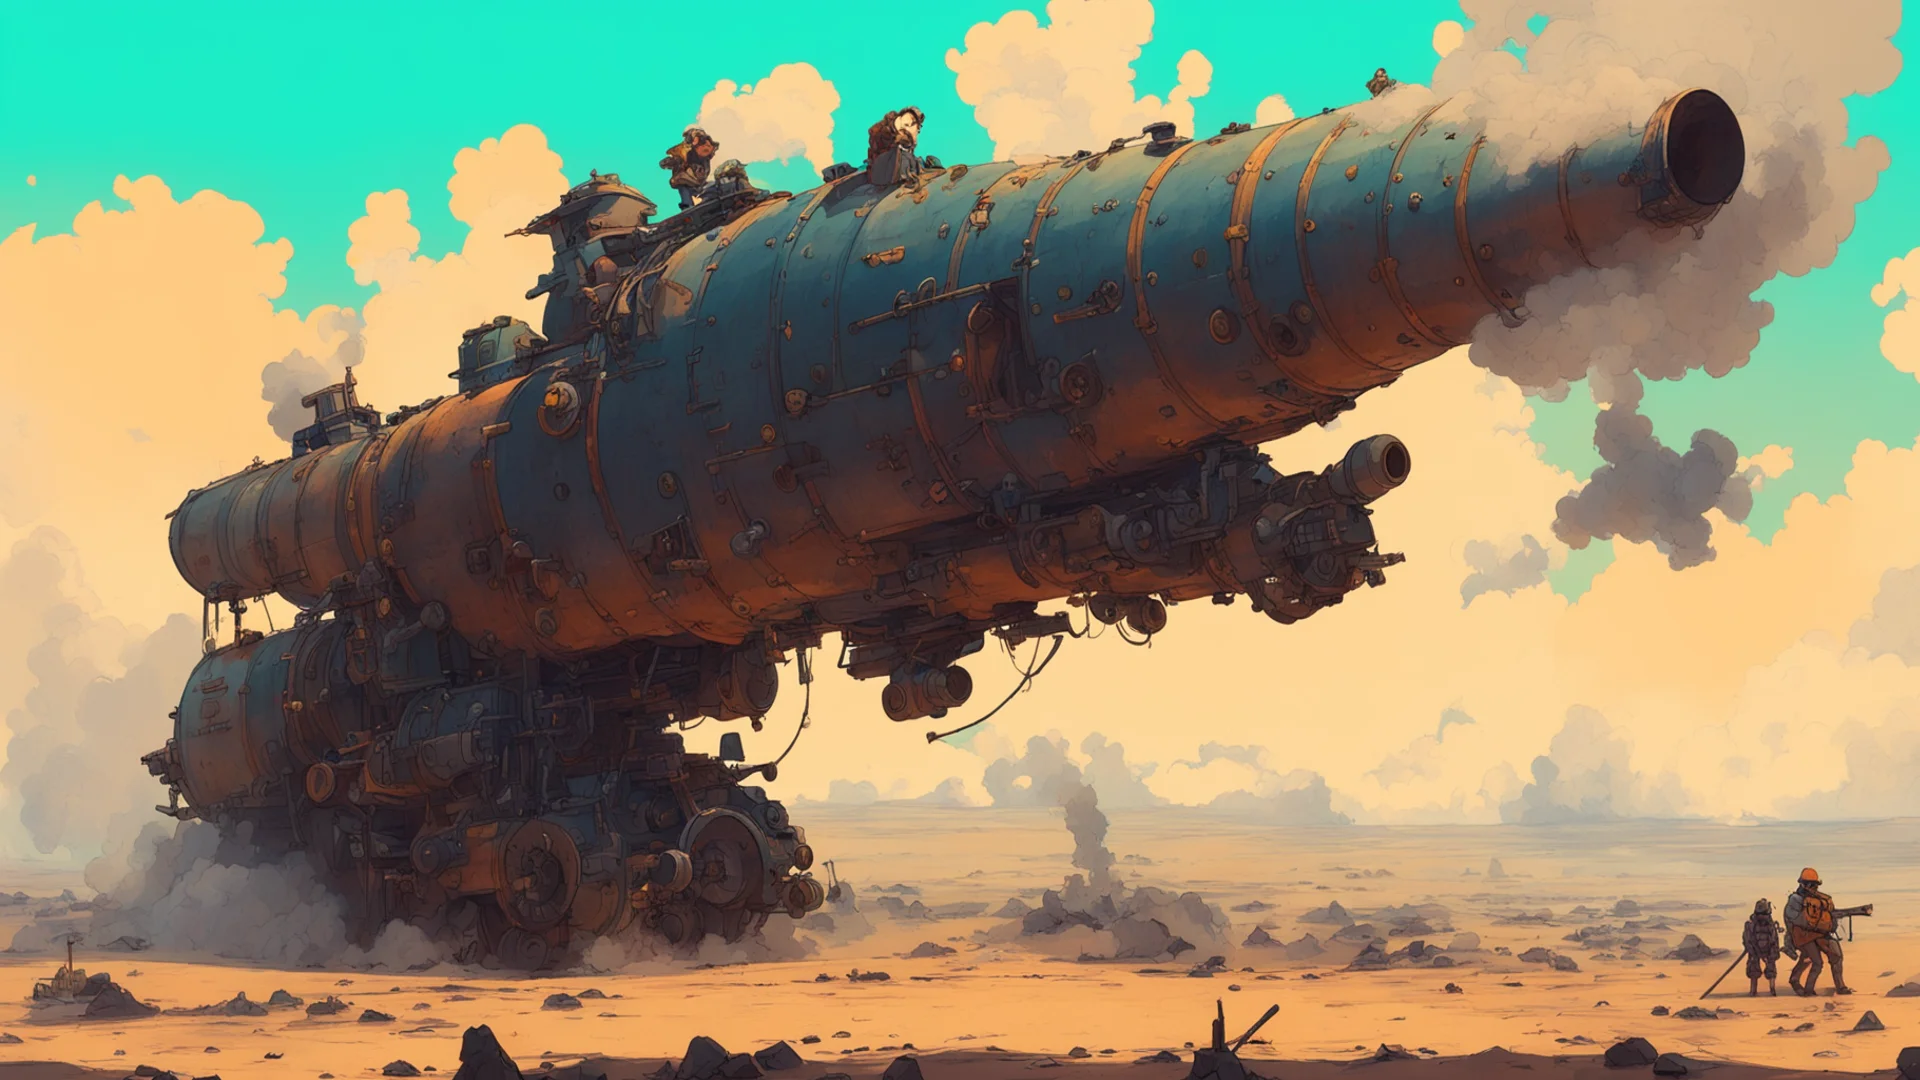 amazing a smoking cannon designed by george lucas on a battlefield moebius ghibli ian mcque wallpaper awesome portrait 2 wide